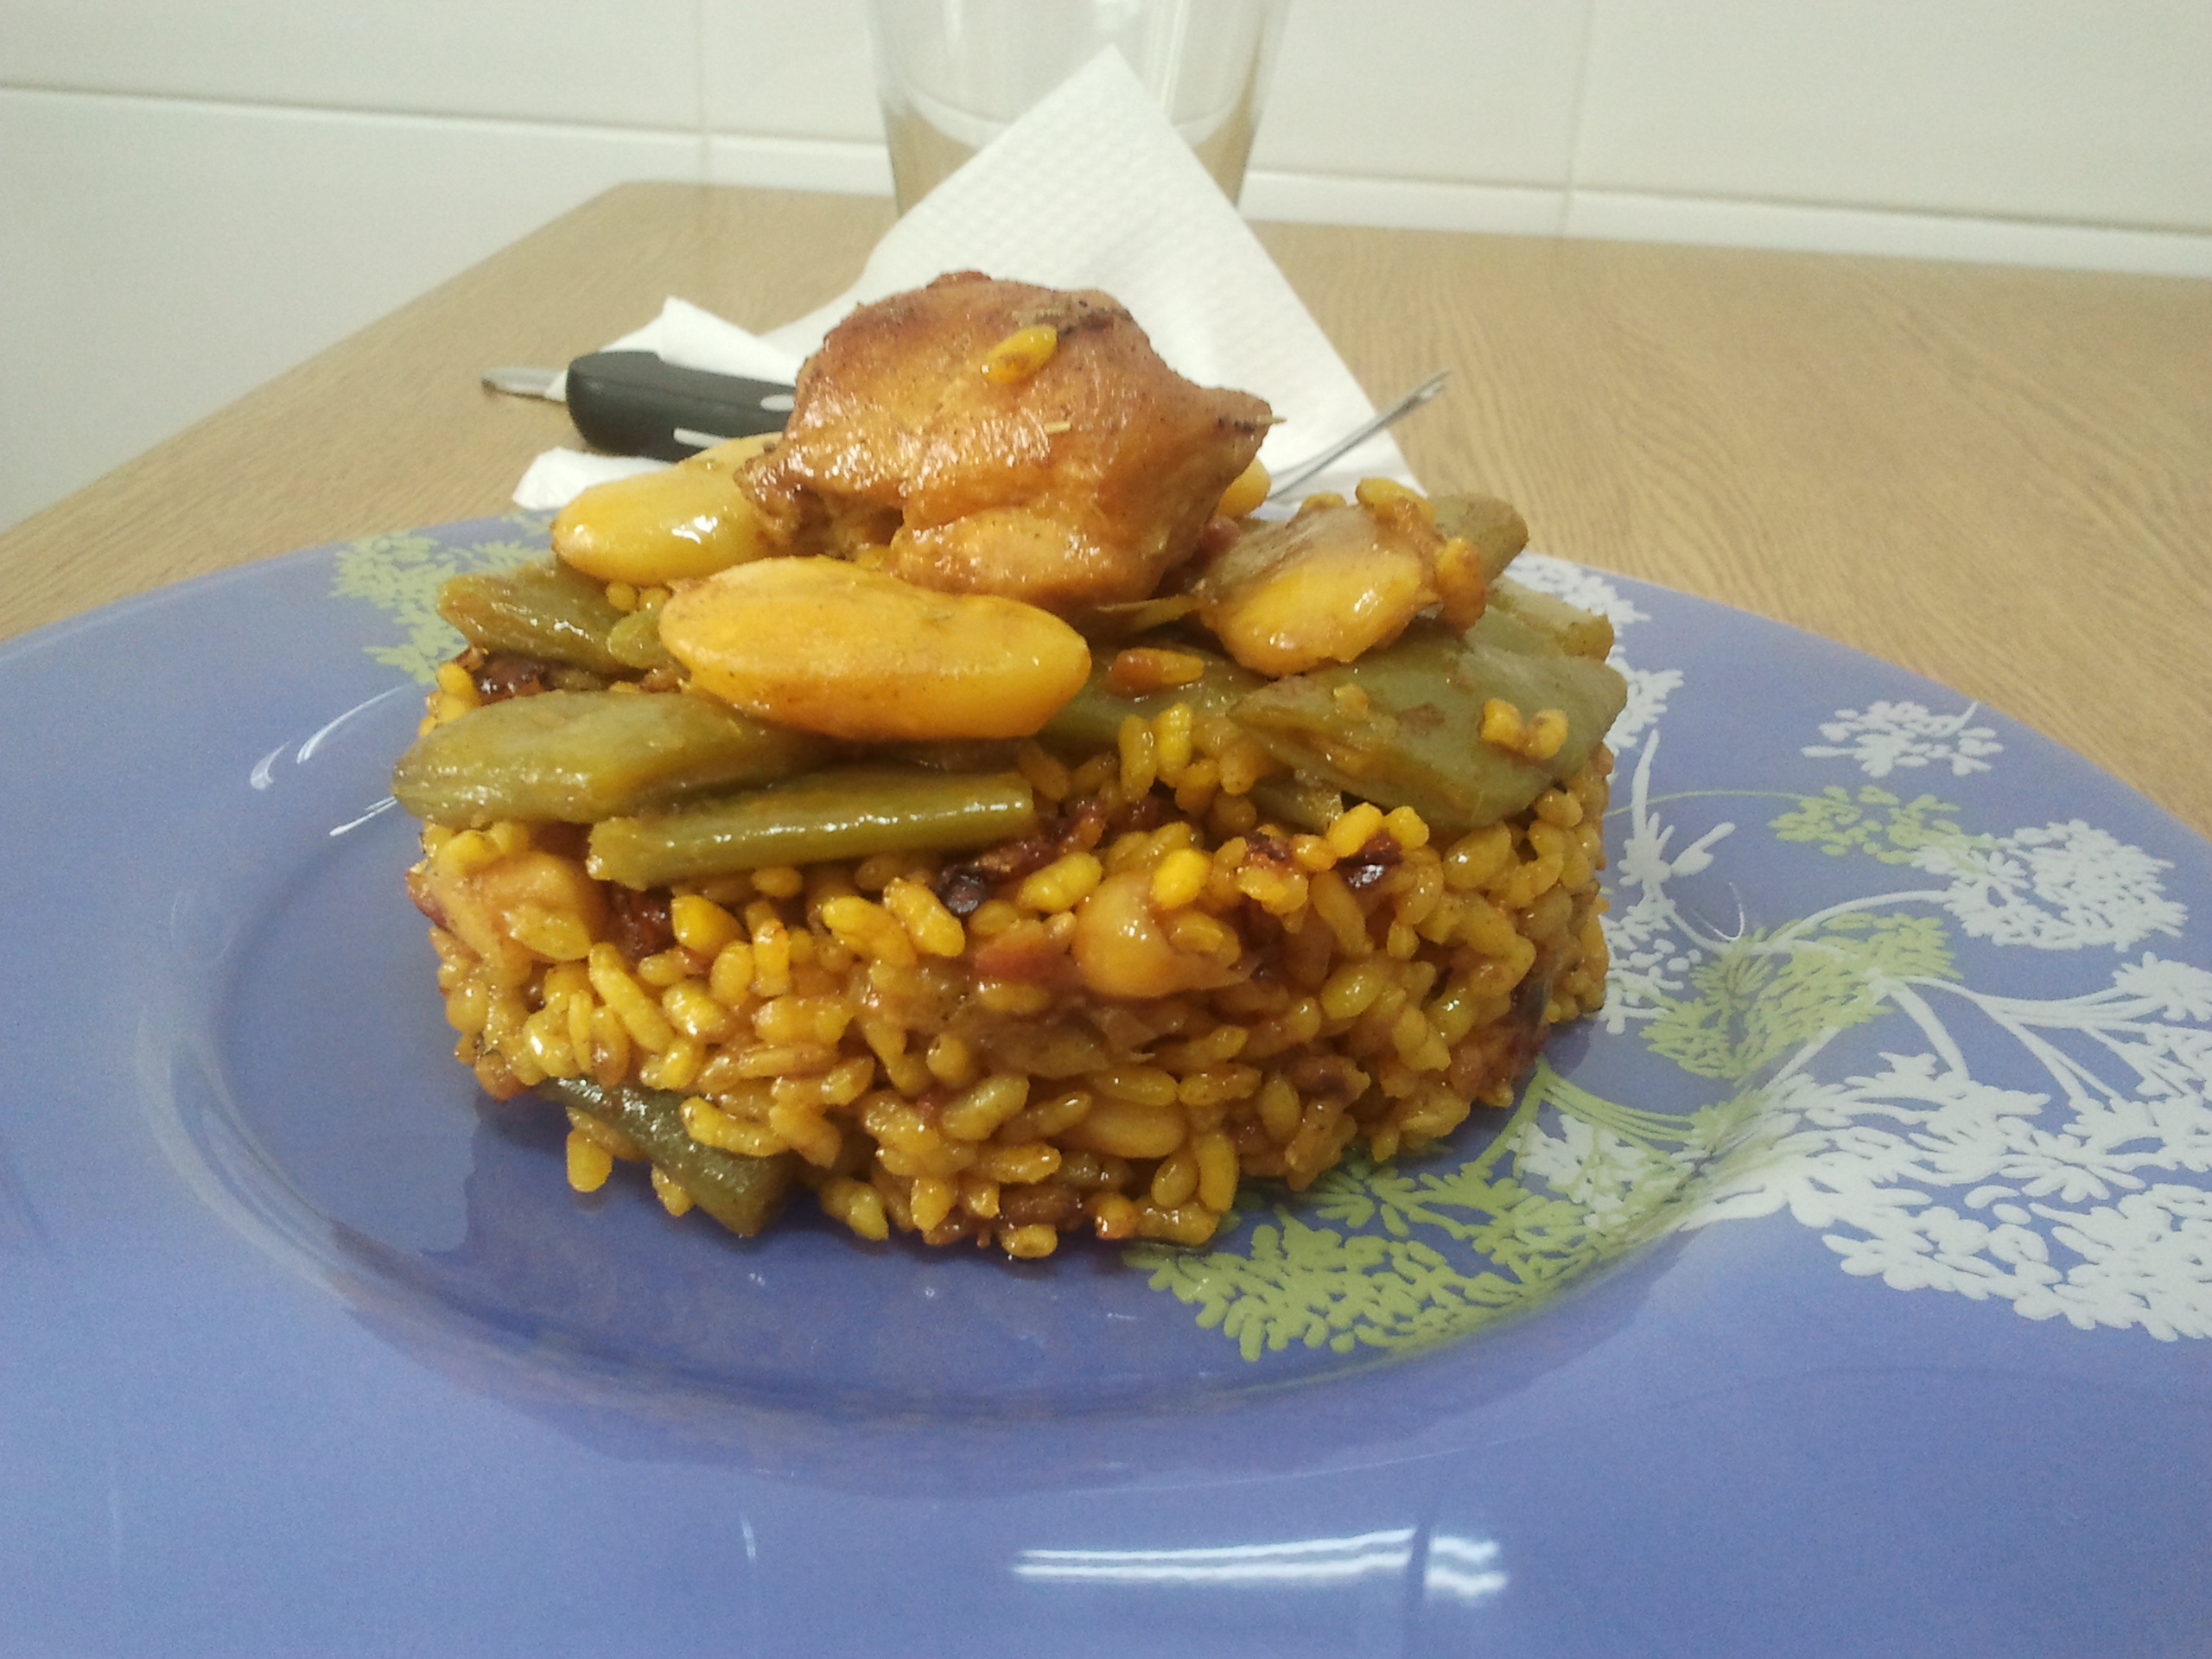 Creative serving of Paella using a barrel and separating ingredients in layers